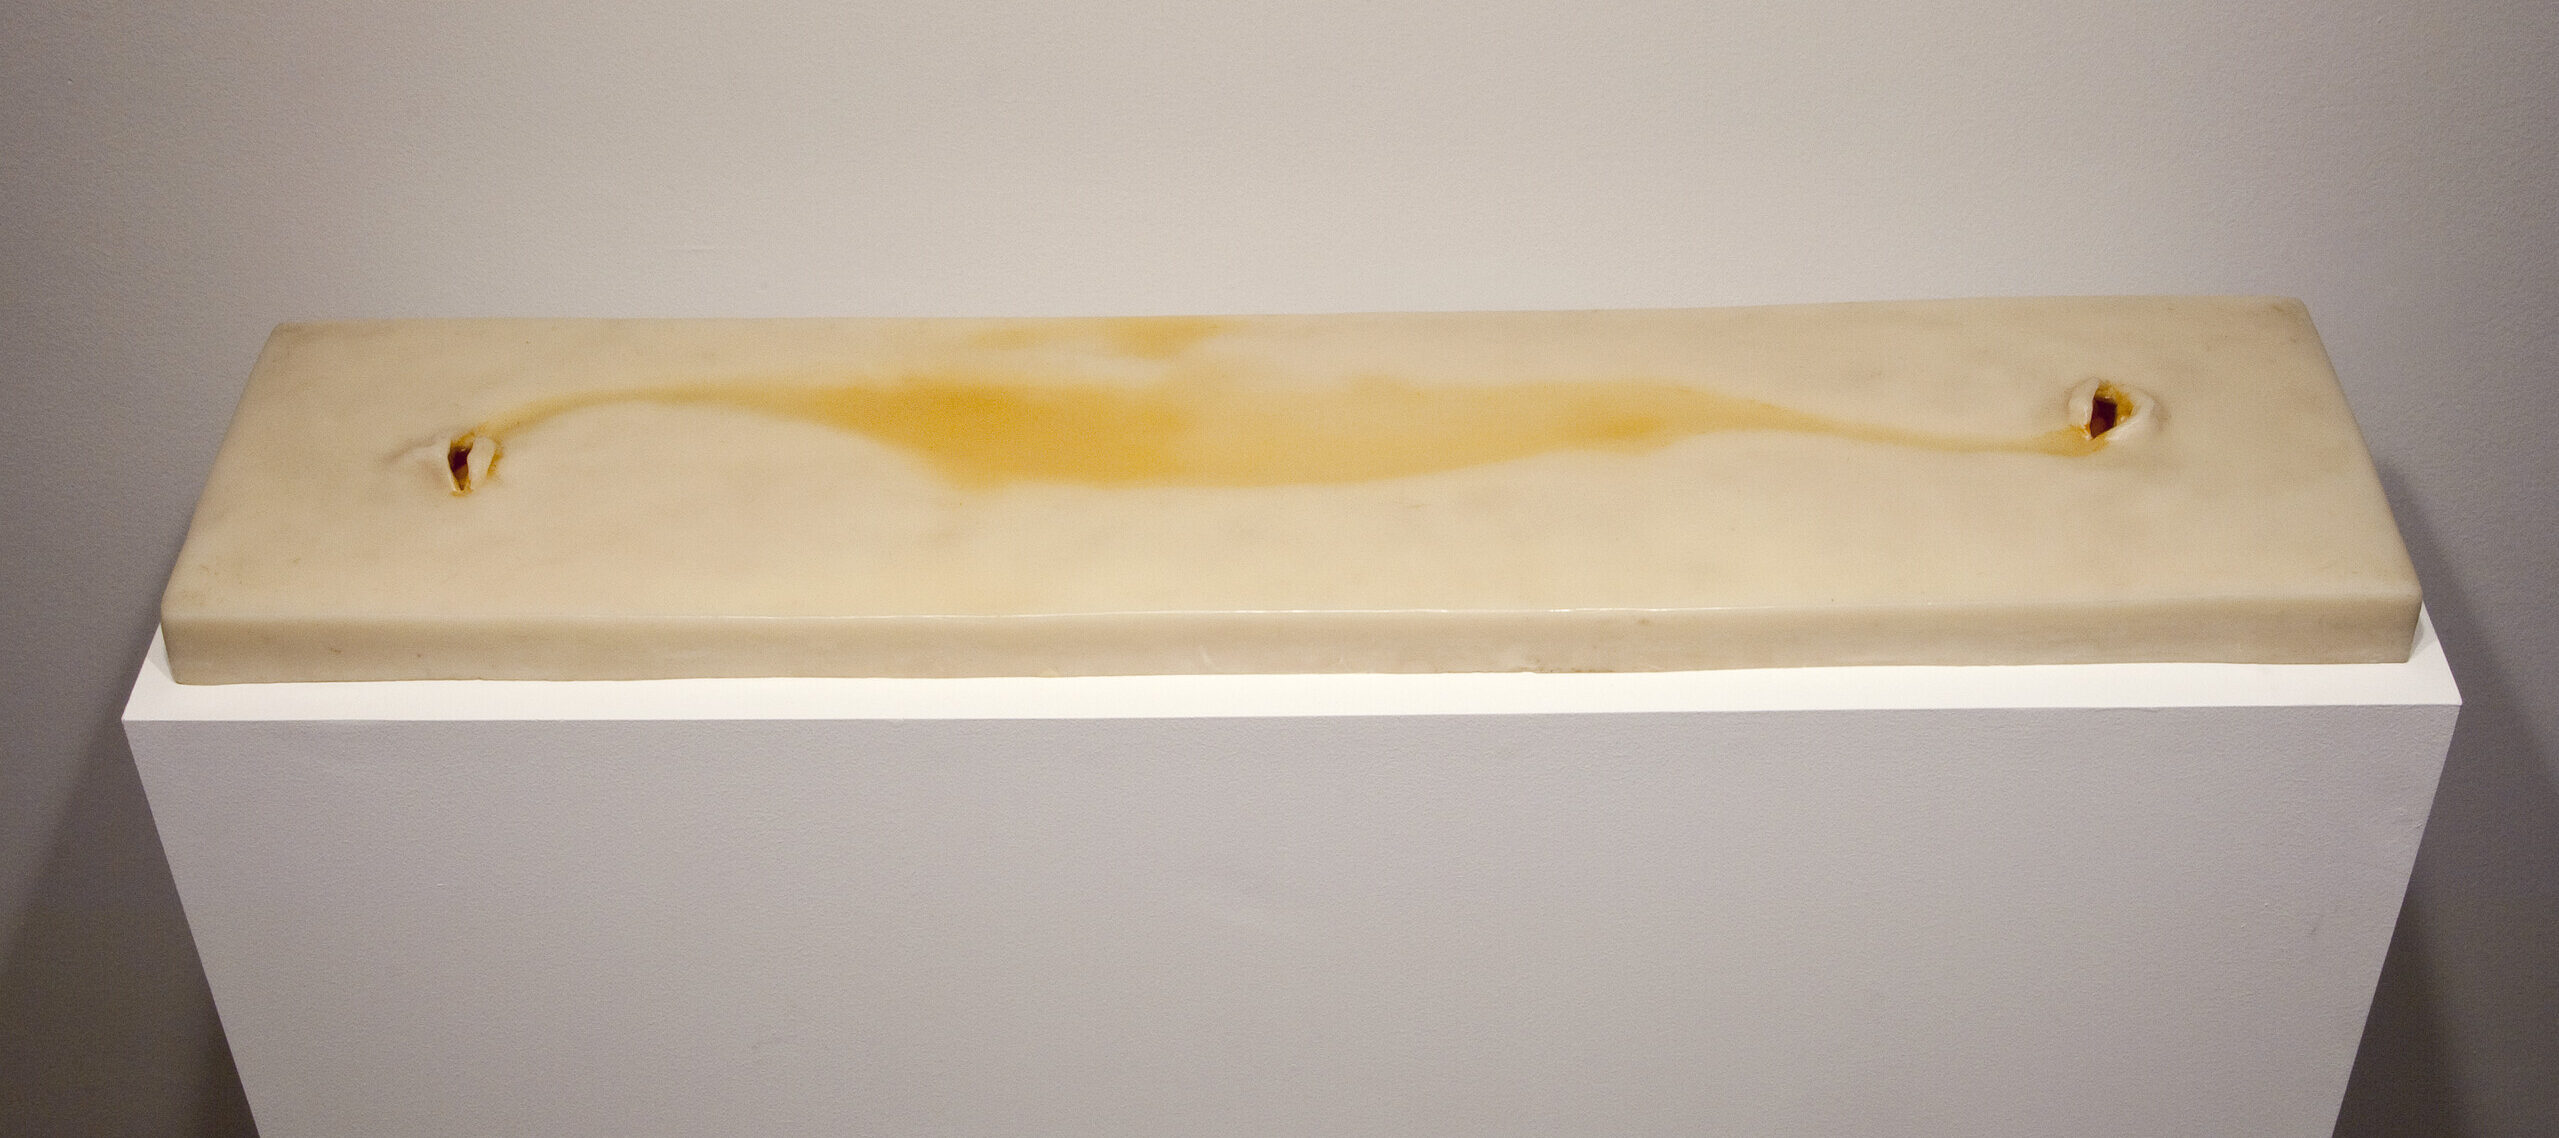 A long sculpture lying on a pedestal. The sculpture is made from beeswax and has an organic shape, resembling two open mouths on opposite sites, connected through a yellow line.